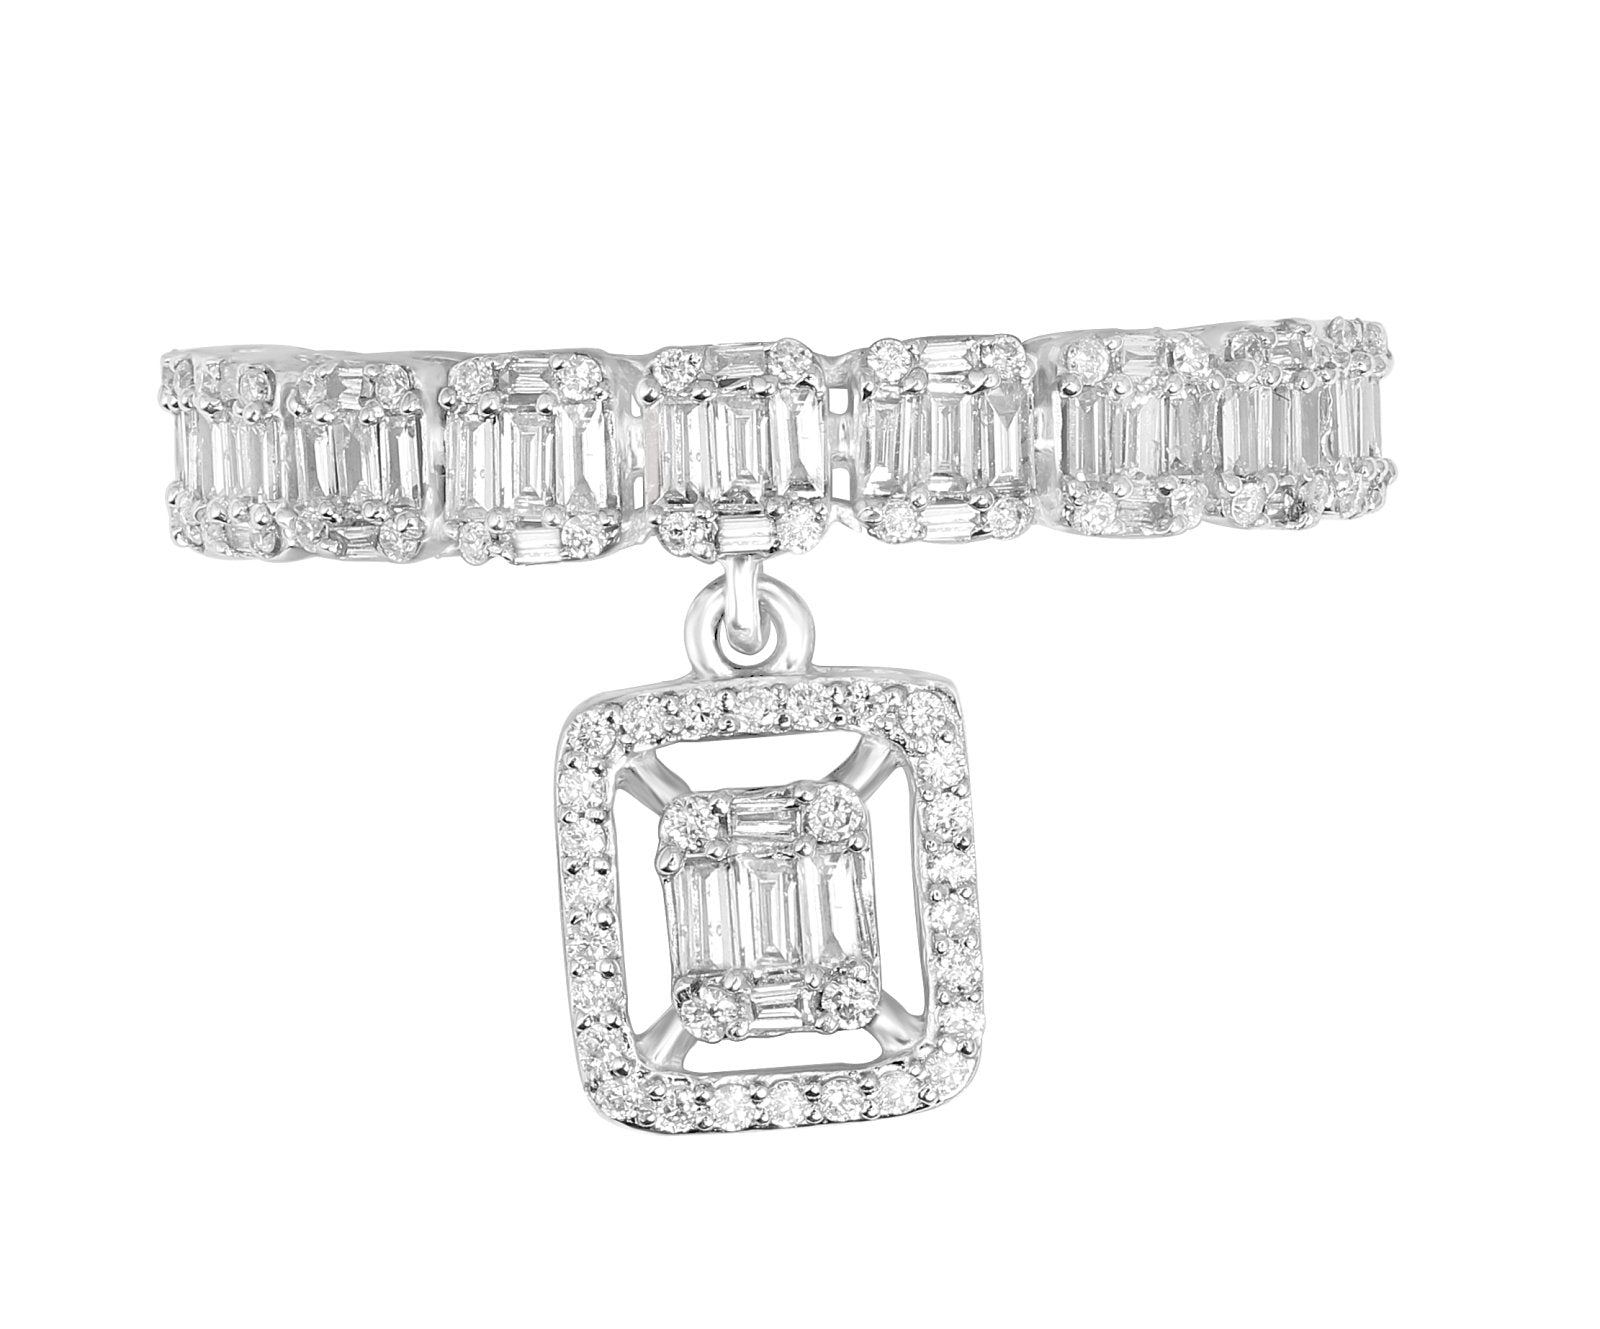 Baguette Diamond Eternity Band & Diamond Drop Charm in Solid 18k White Gold Rings Estella Collection #product_description# 17456 18k Colorless Gemstone Diamond #tag4# #tag5# #tag6# #tag7# #tag8# #tag9# #tag10# 6